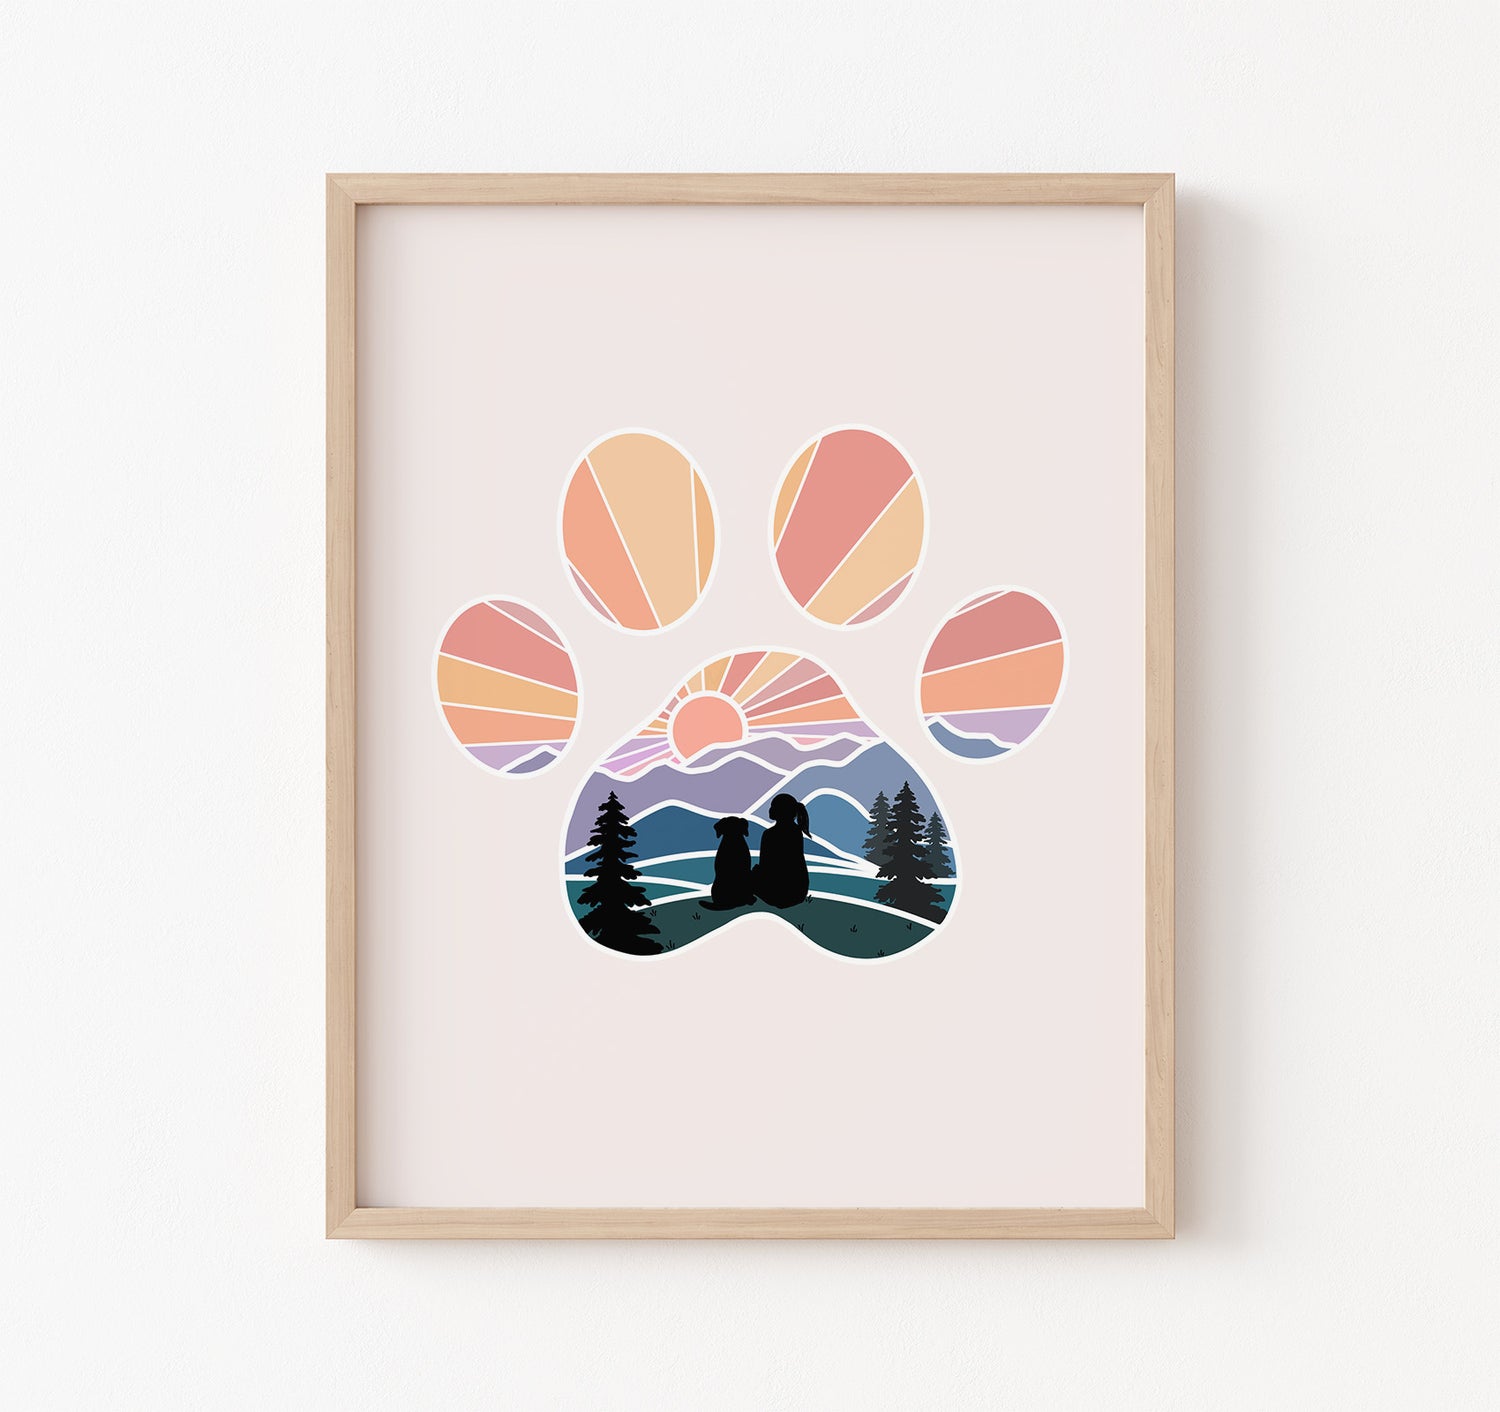 Art print of dog paw print with a girl and her dog watching the sunset over the mountains